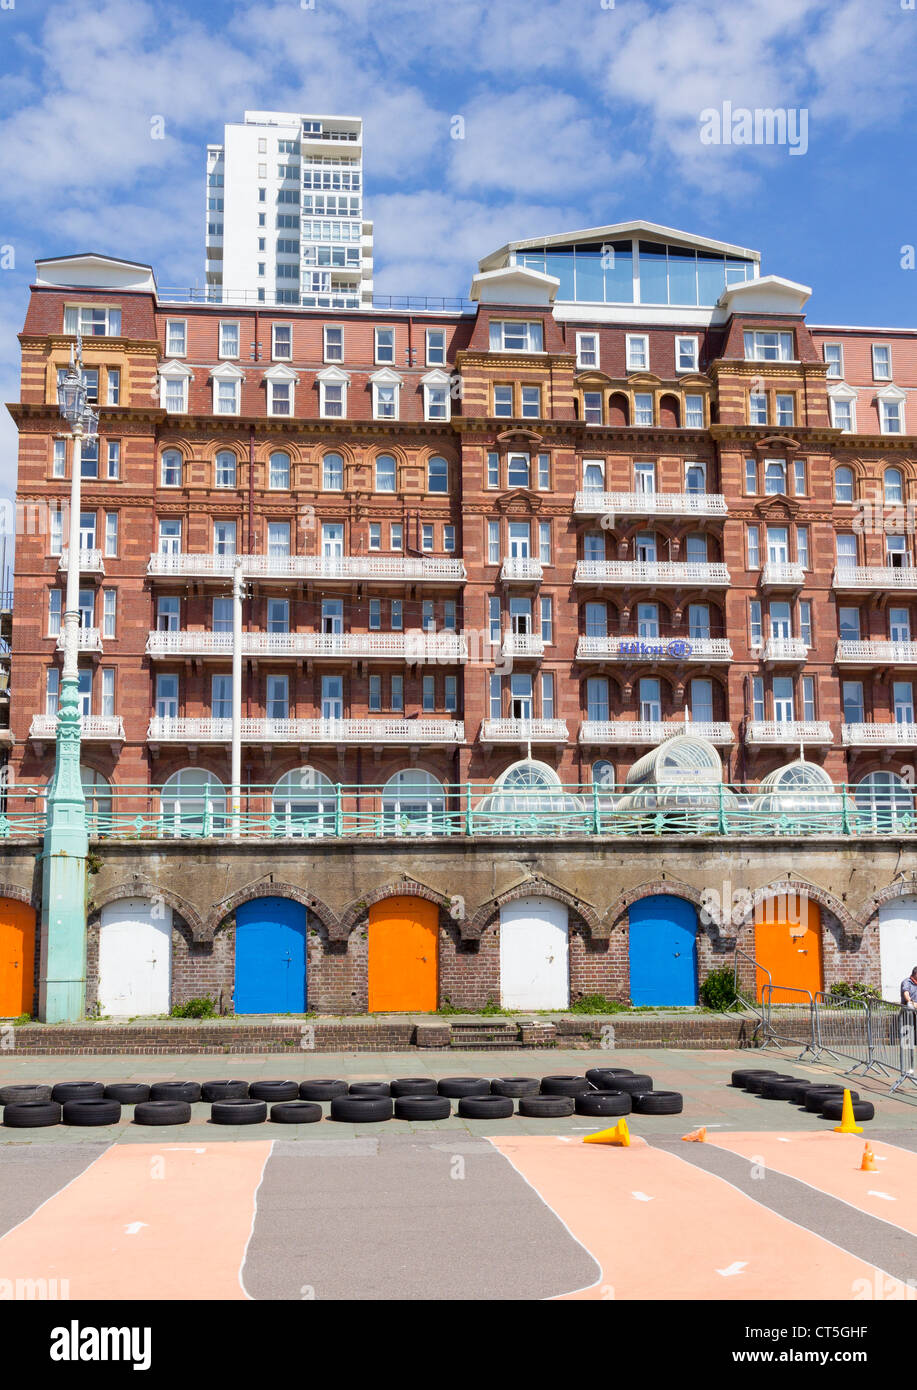 Hilton Metropole Hotel, Brighton and in the foreground in front of the promenade an area marked off for segue riding. Stock Photo